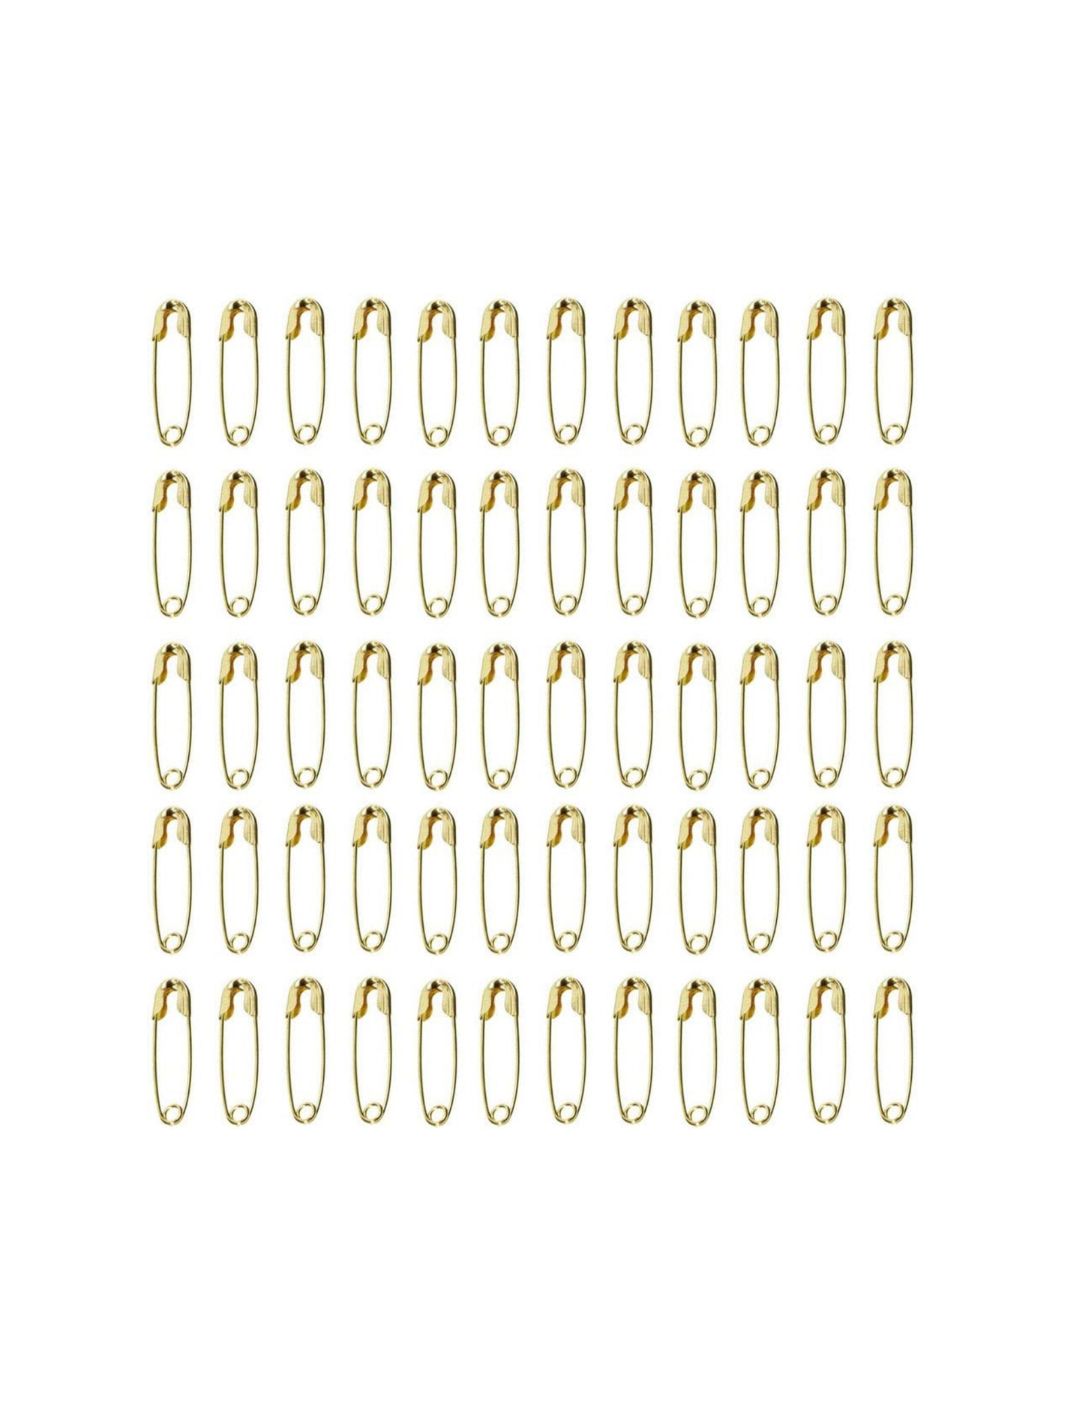 Mini Safety Pins - Gold